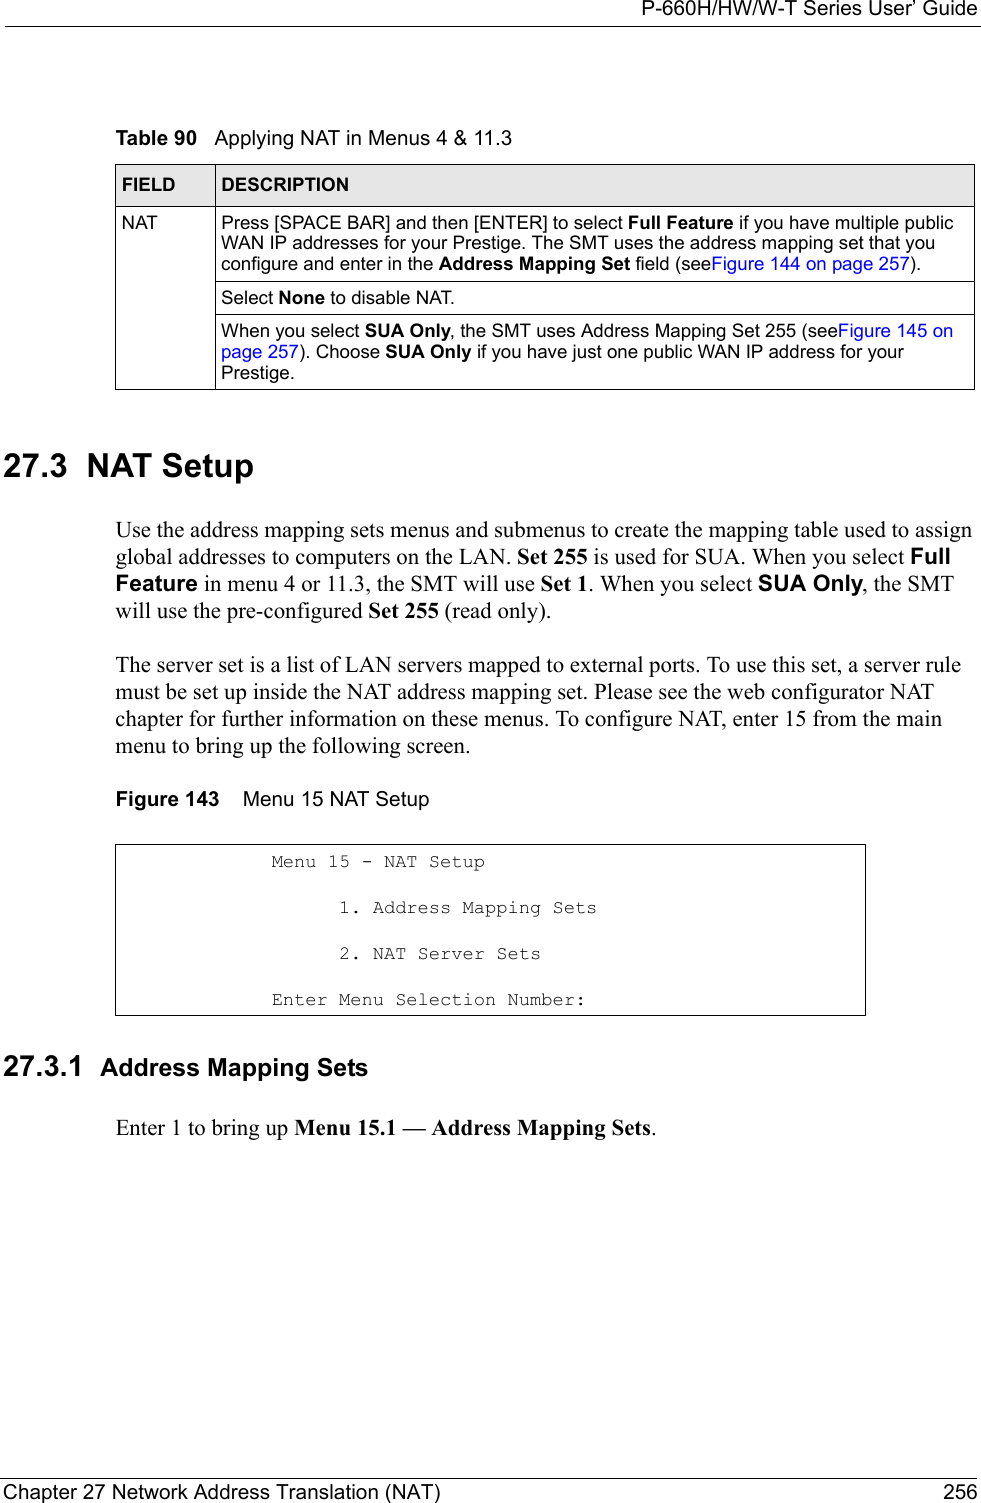 P-660H/HW/W-T Series User’ GuideChapter 27 Network Address Translation (NAT) 25627.3  NAT SetupUse the address mapping sets menus and submenus to create the mapping table used to assign global addresses to computers on the LAN. Set 255 is used for SUA. When you select Full Feature in menu 4 or 11.3, the SMT will use Set 1. When you select SUA Only, the SMT will use the pre-configured Set 255 (read only).The server set is a list of LAN servers mapped to external ports. To use this set, a server rule must be set up inside the NAT address mapping set. Please see the web configurator NAT chapter for further information on these menus. To configure NAT, enter 15 from the main menu to bring up the following screen. Figure 143    Menu 15 NAT Setup 27.3.1  Address Mapping Sets Enter 1 to bring up Menu 15.1 — Address Mapping Sets.Table 90   Applying NAT in Menus 4 &amp; 11.3FIELD DESCRIPTIONNAT Press [SPACE BAR] and then [ENTER] to select Full Feature if you have multiple public WAN IP addresses for your Prestige. The SMT uses the address mapping set that you configure and enter in the Address Mapping Set field (seeFigure 144 on page 257). Select None to disable NAT.When you select SUA Only, the SMT uses Address Mapping Set 255 (seeFigure 145 on page 257). Choose SUA Only if you have just one public WAN IP address for your Prestige.Menu 15 - NAT Setup      1. Address Mapping Sets      2. NAT Server SetsEnter Menu Selection Number: